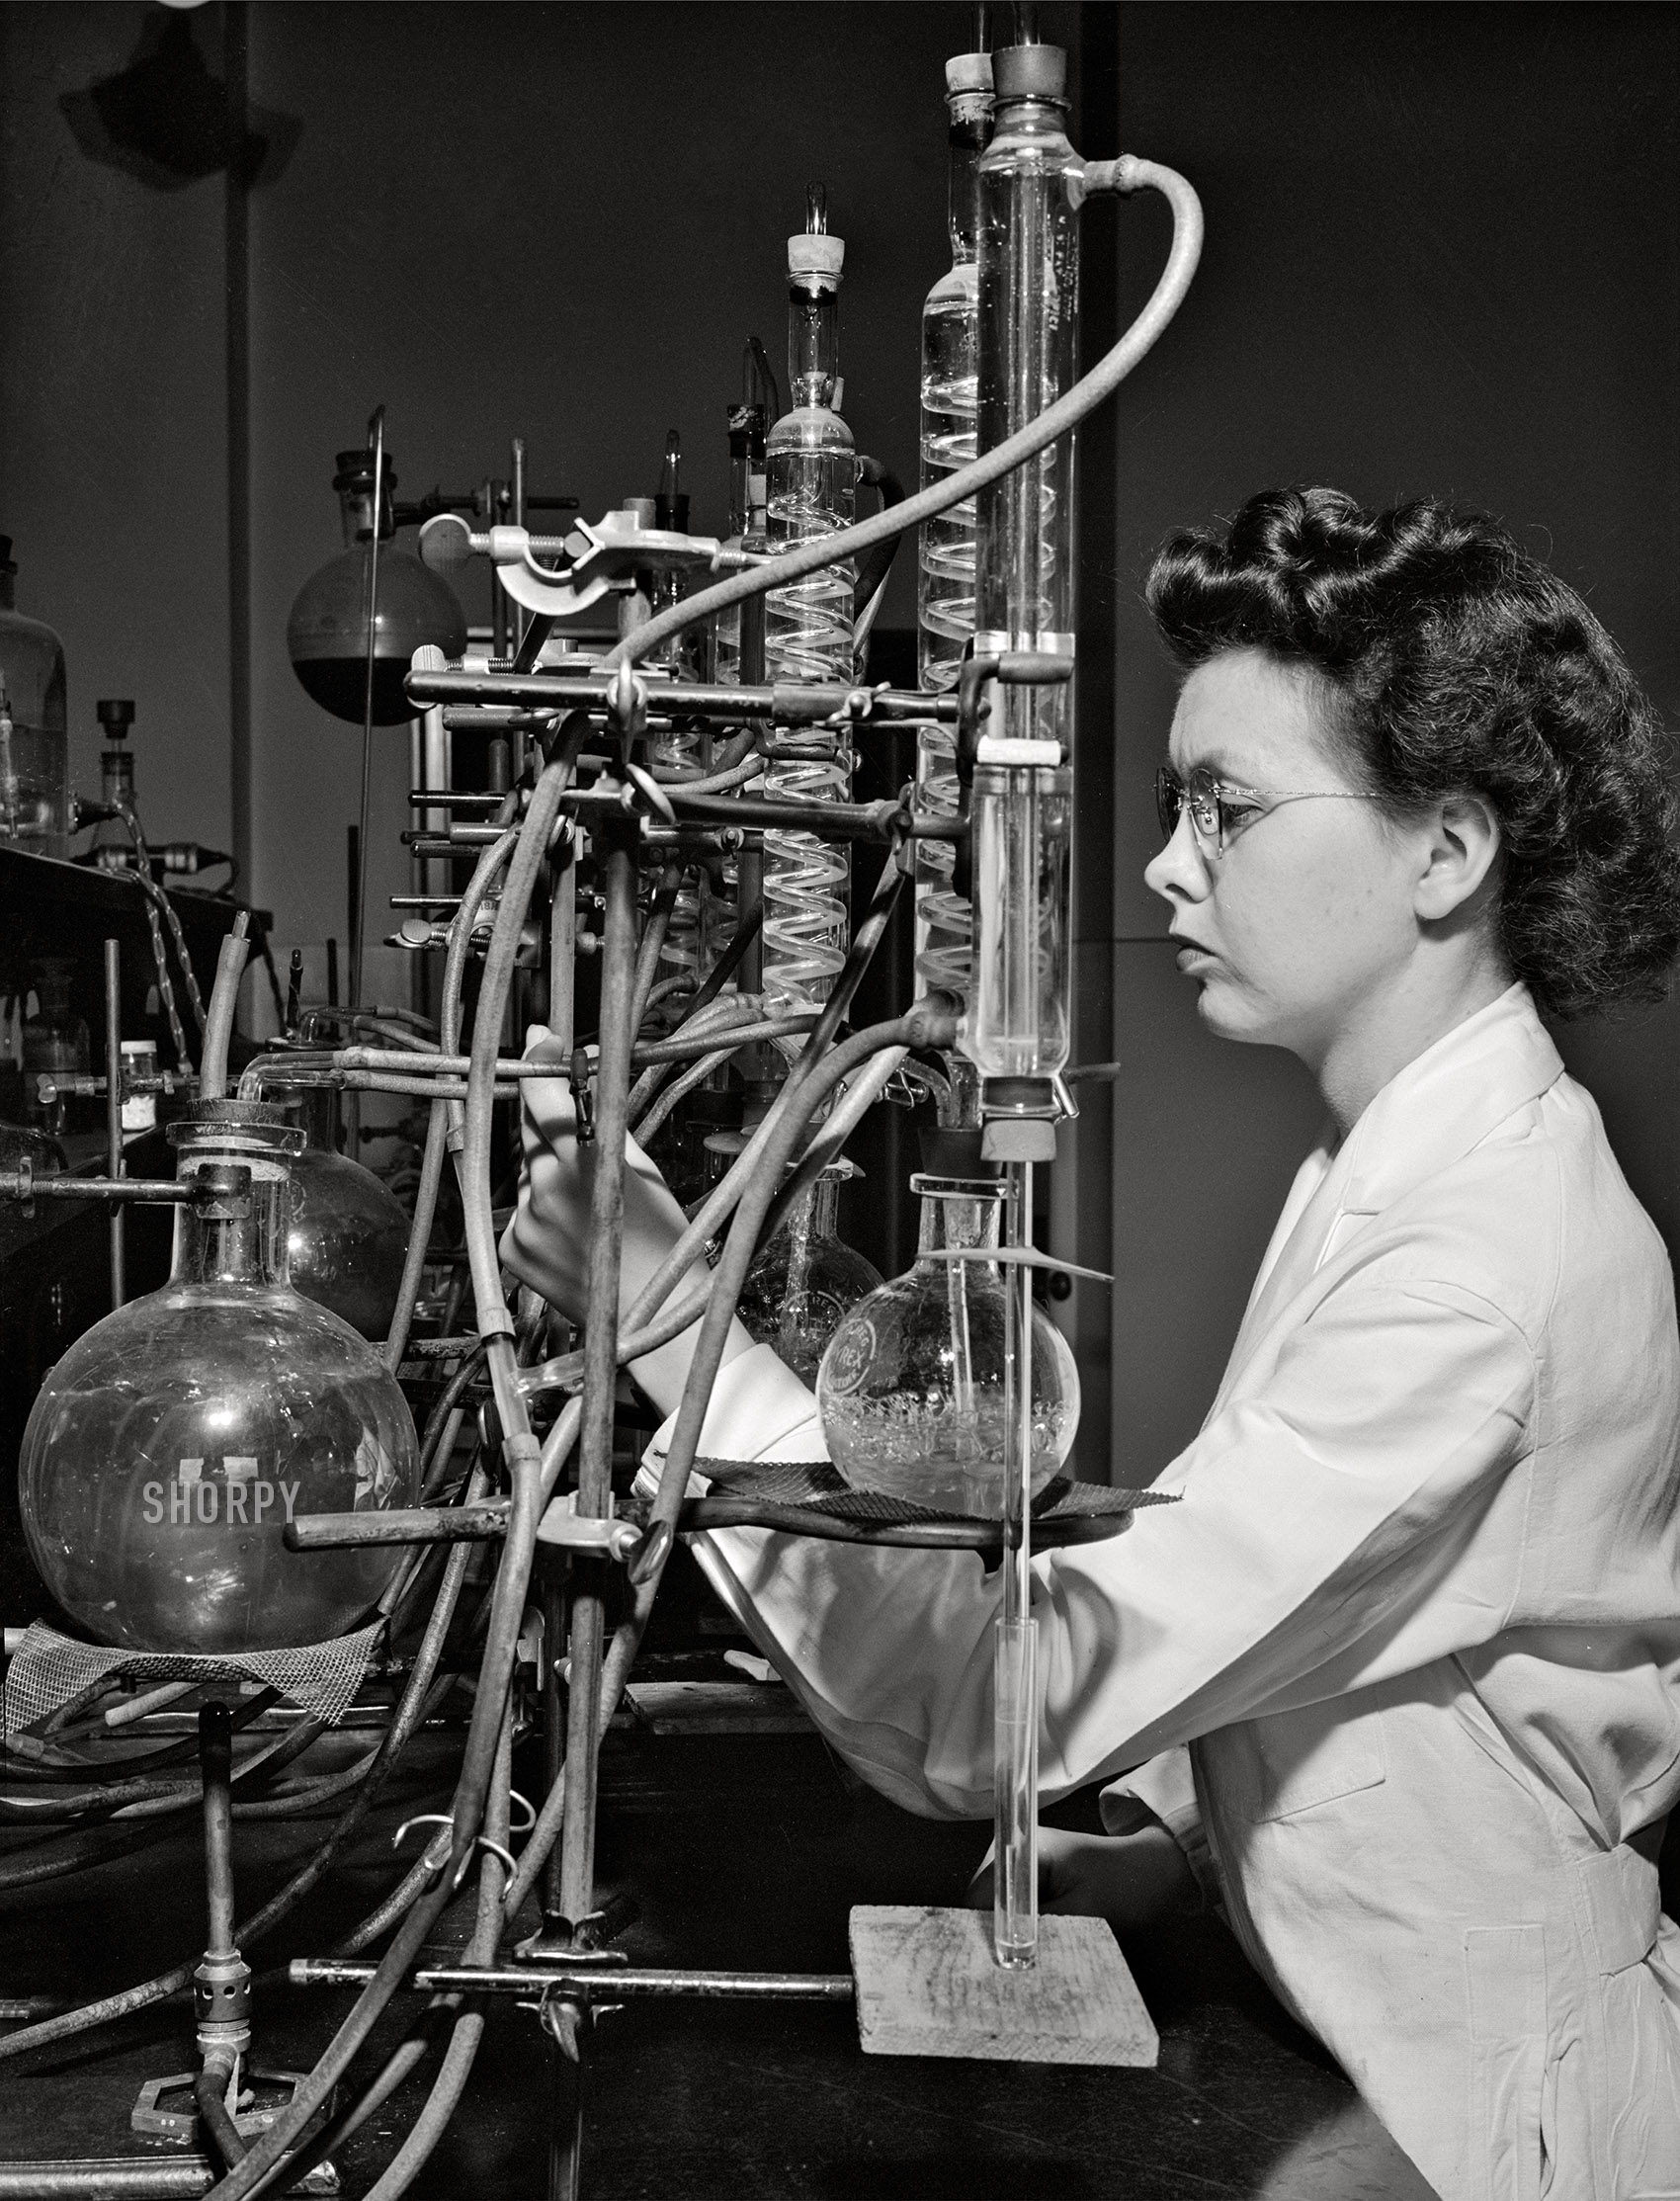 May 1942. "Iowa State College. Ames, Iowa. Miss Jeanne Dougherty, graduate in Bacteriology, working in the laboratory in the Dairy Industry Department. She is conducting experiments on the effects of acids on flavor of butter." Acetate negative by Jack Delano. View full size.